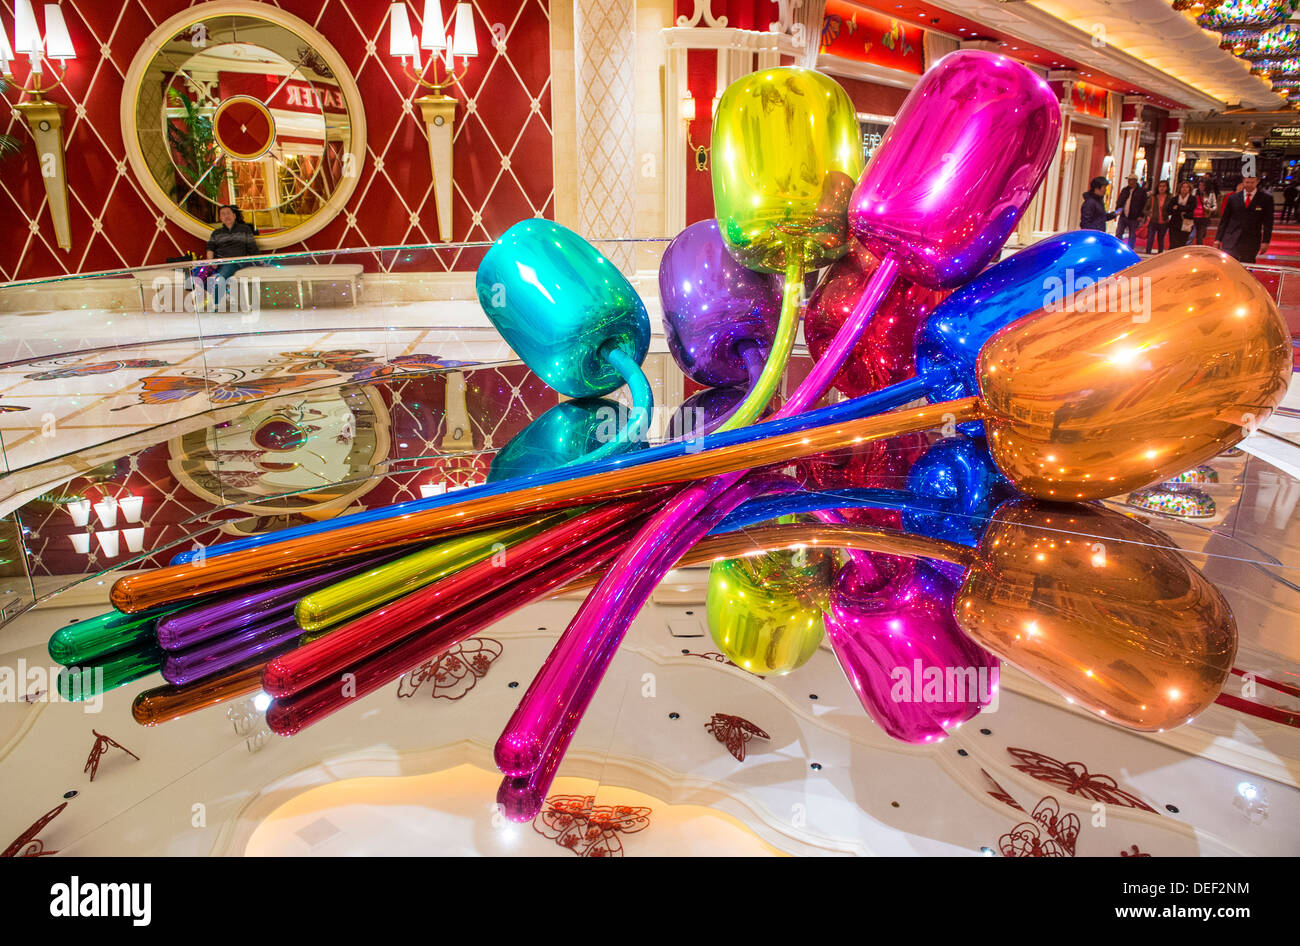 The Jeff Koons Tulips Sculpture display at the Wynn Hotel in Las Vegas Stock Photo